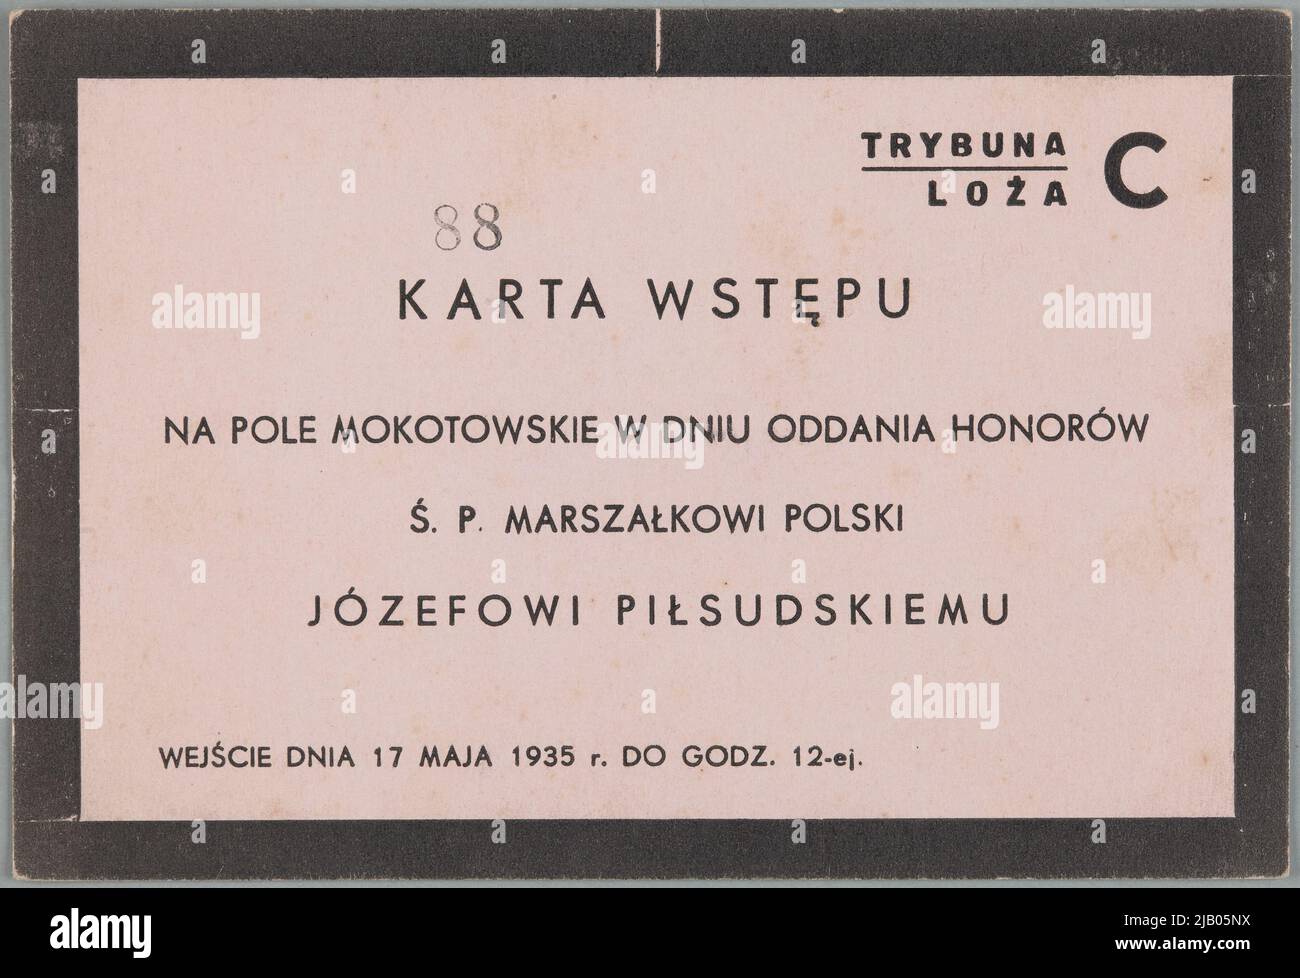 Admission card to the funeral ceremony of the Polish Marshal Józef Piłsudski at the Mokotowskie Fields in Warsaw, May 17, 1935 unknown label Stock Photo